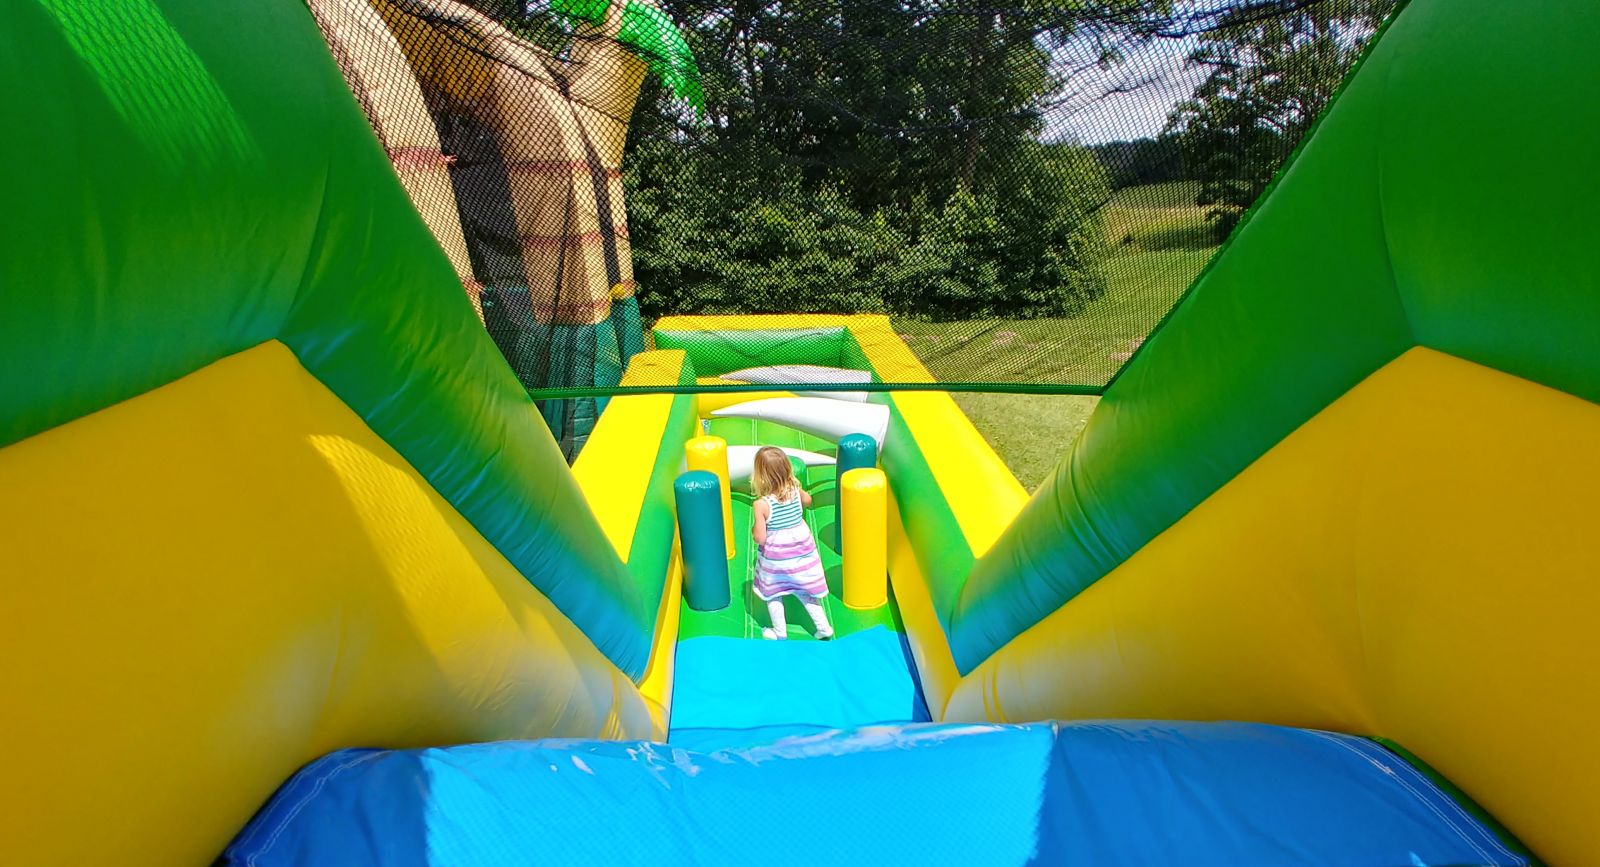 Young girl on tropical inflatable obstacle course